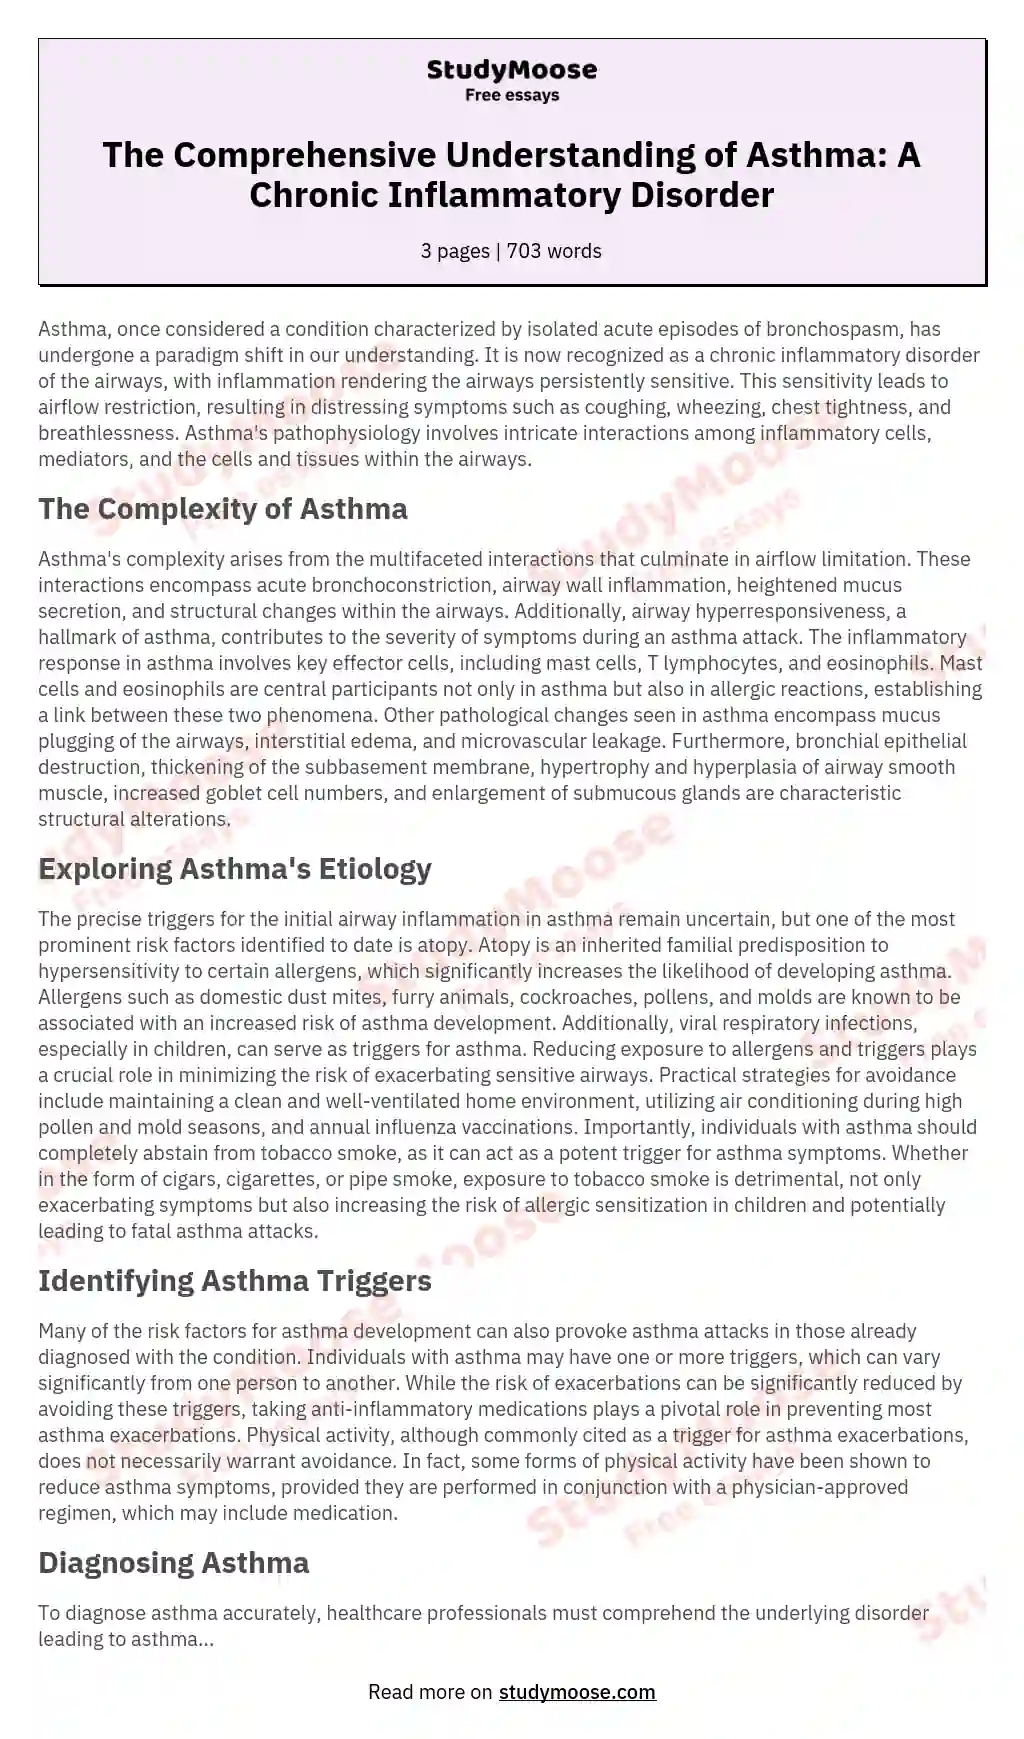 The Comprehensive Understanding of Asthma: A Chronic Inflammatory Disorder essay